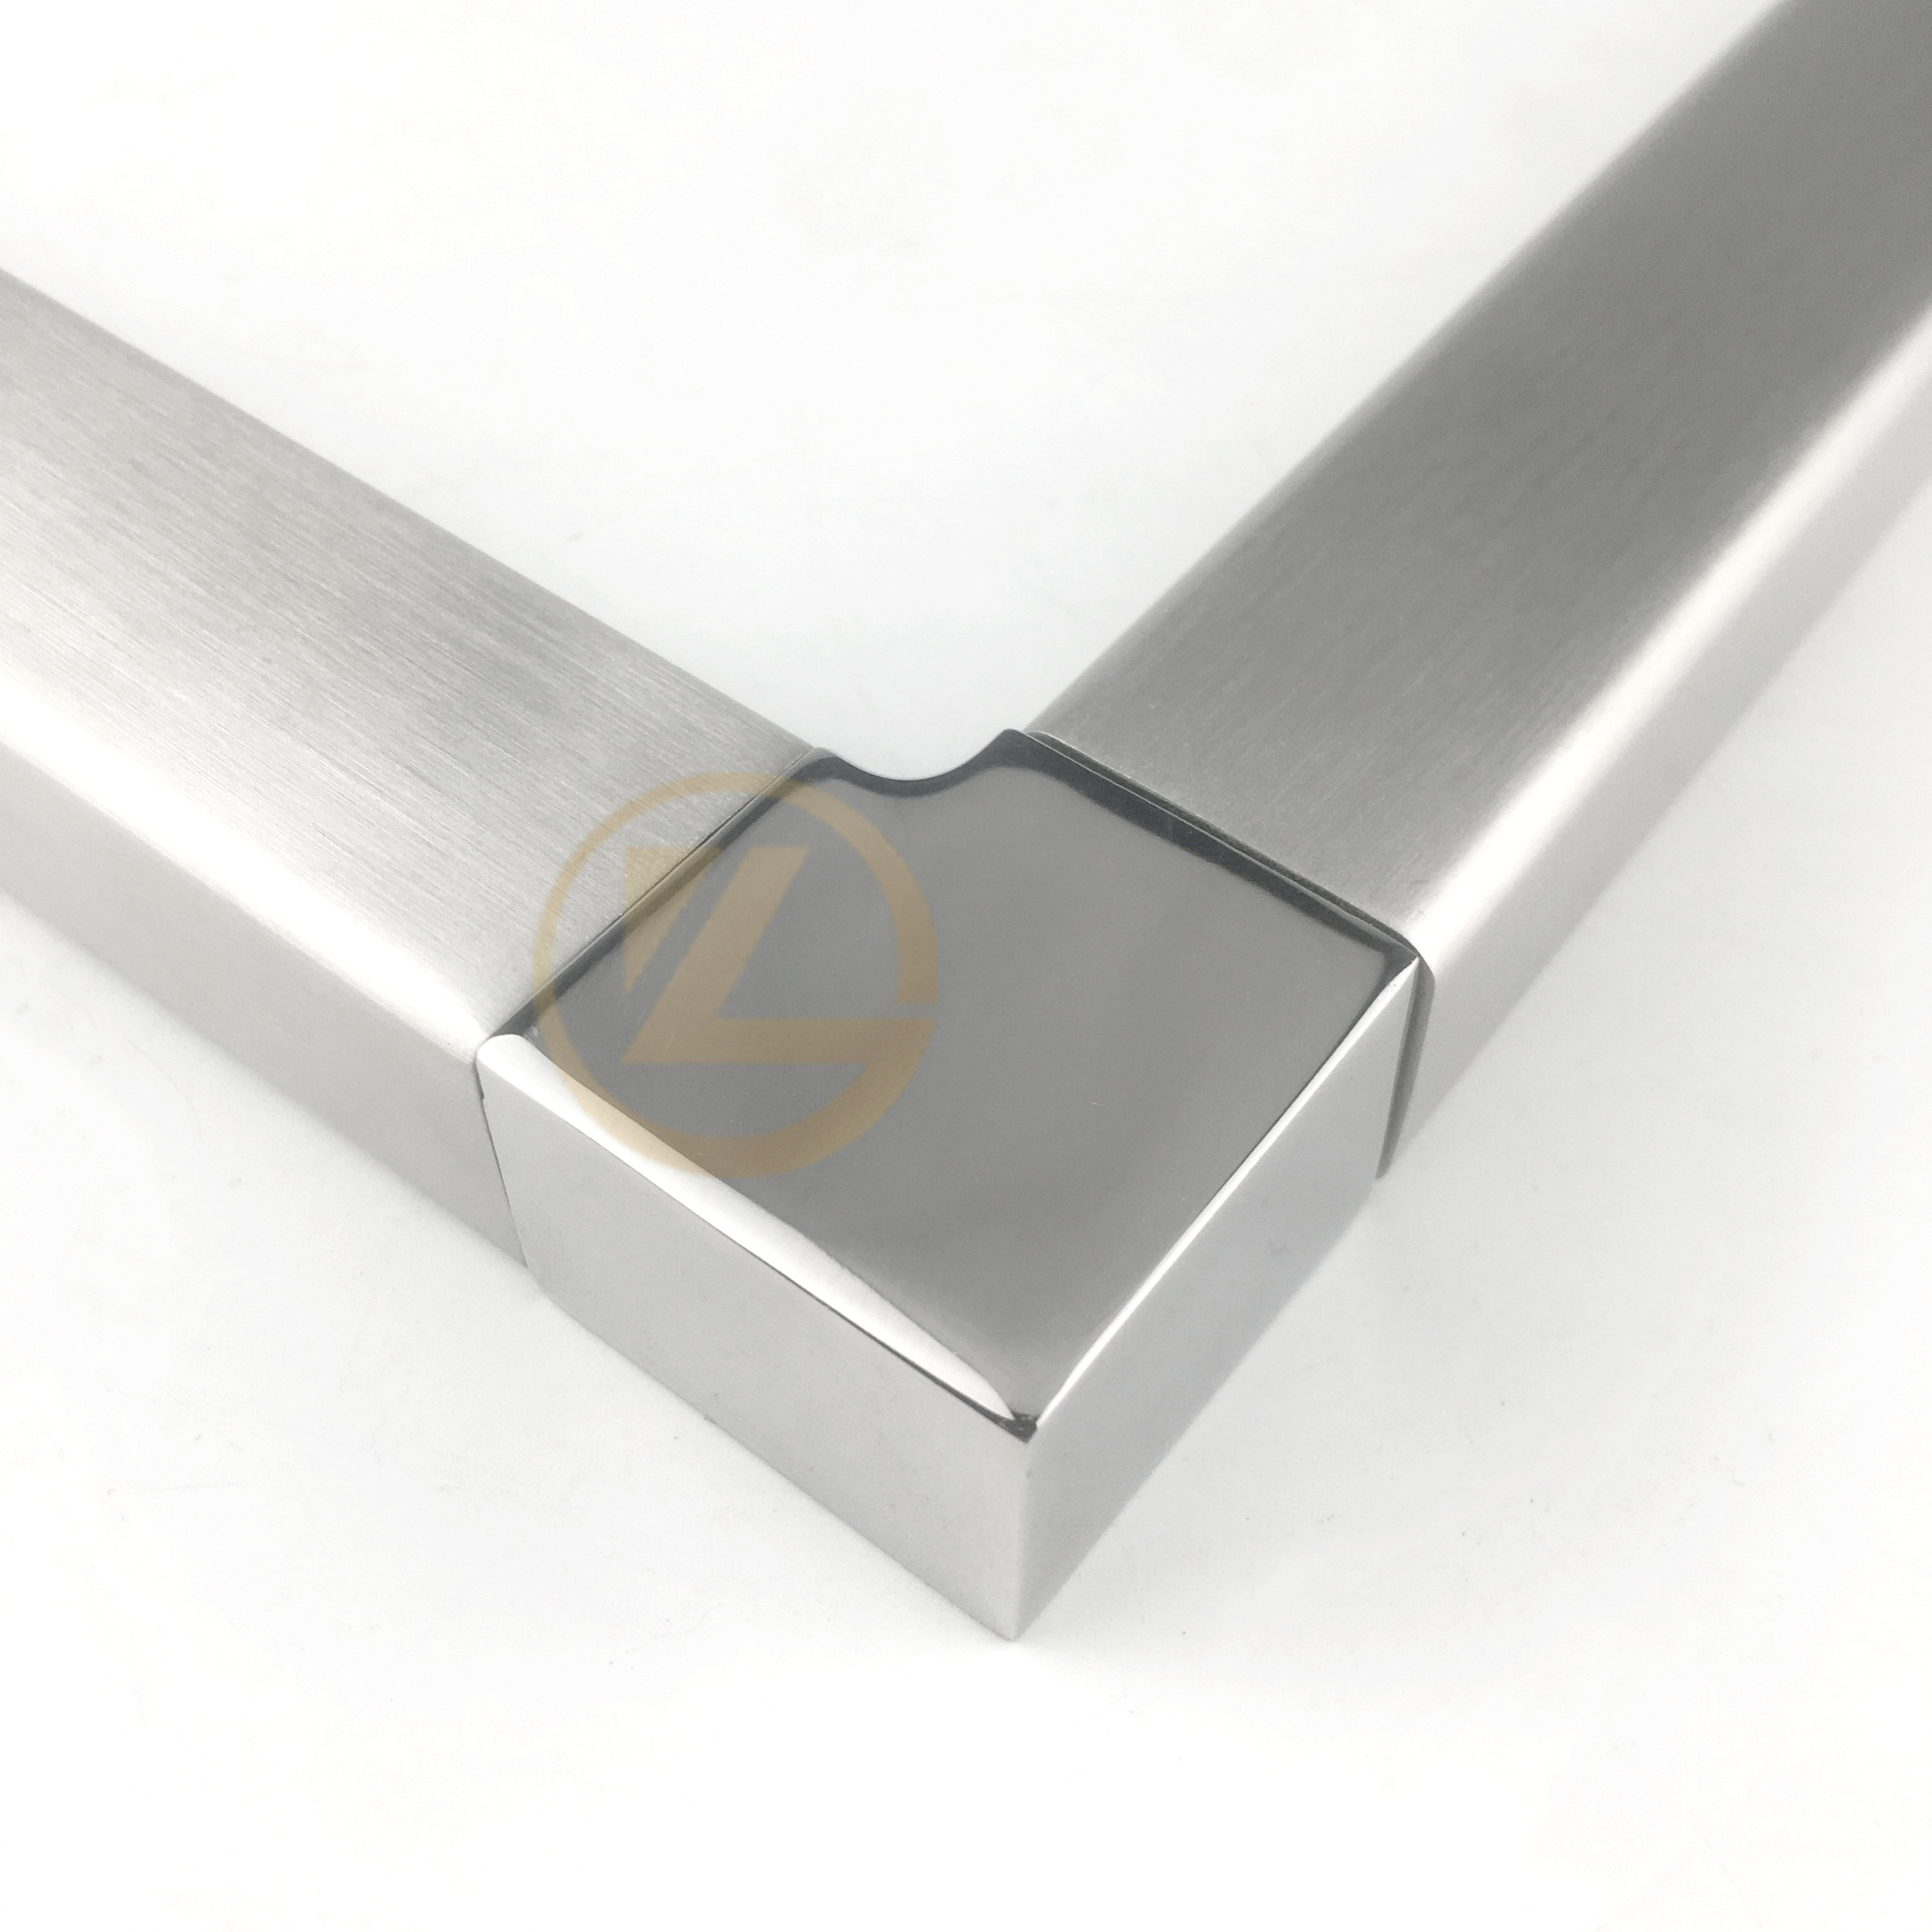 YL Stainless 90 degree handrail connector glass balustrade